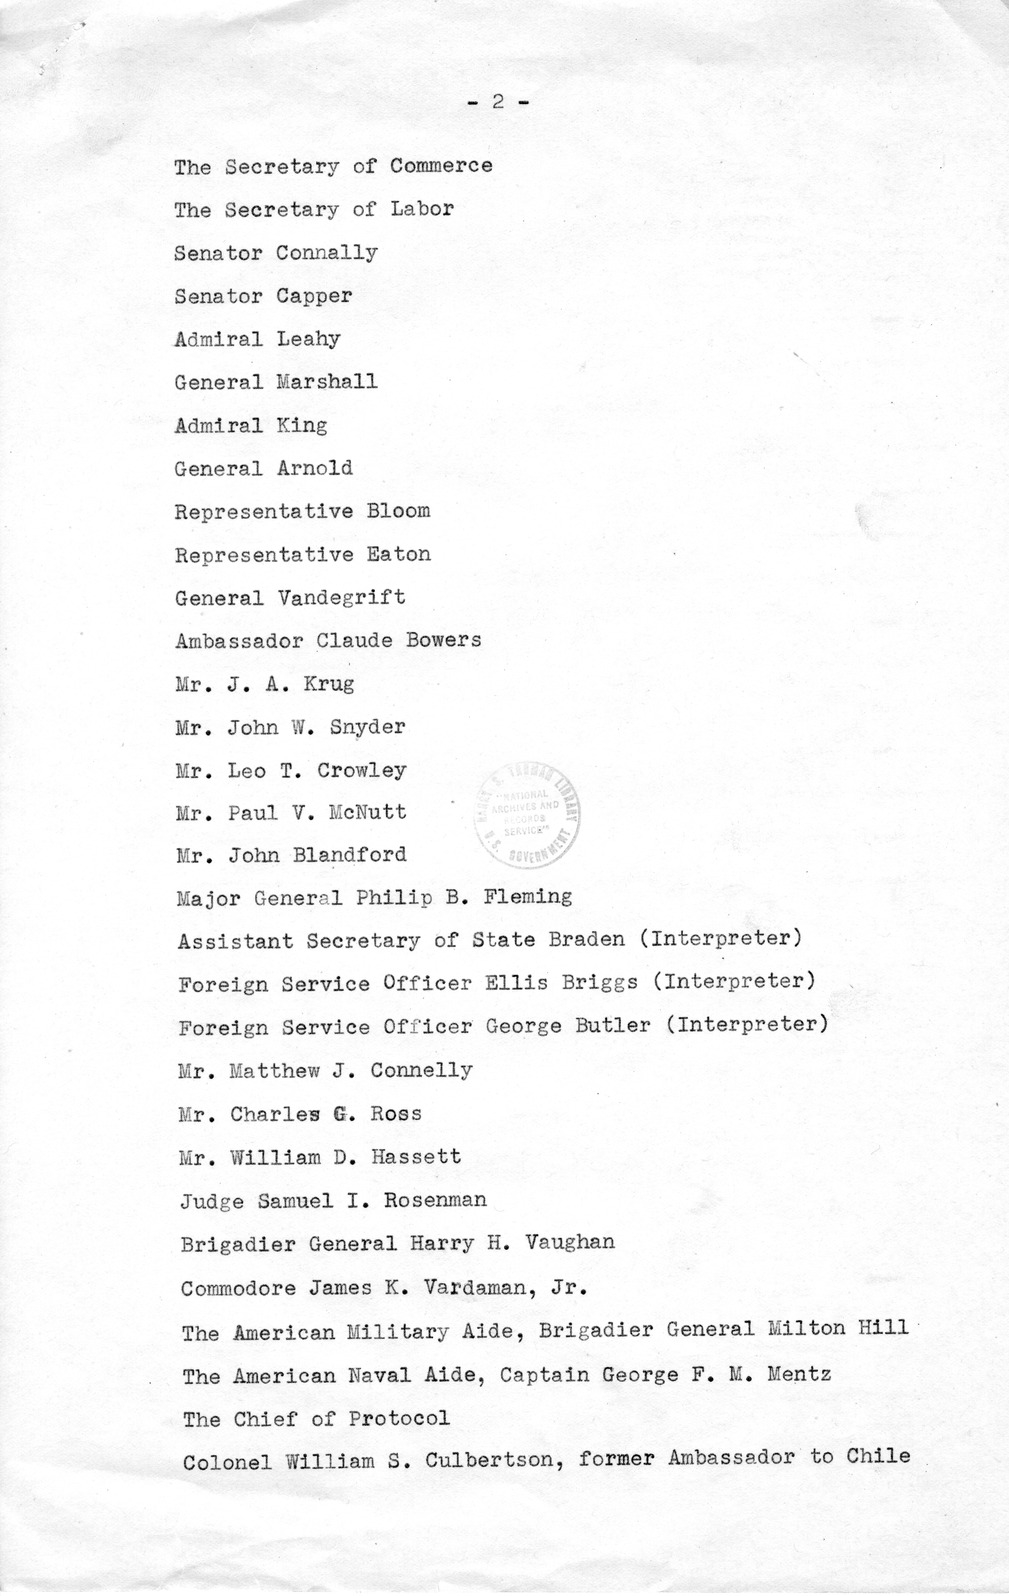 Memorandum, Suggested List of Guests to be Invited to a White House Dinner in Honor of Juan Antonio Rios, President of Chile